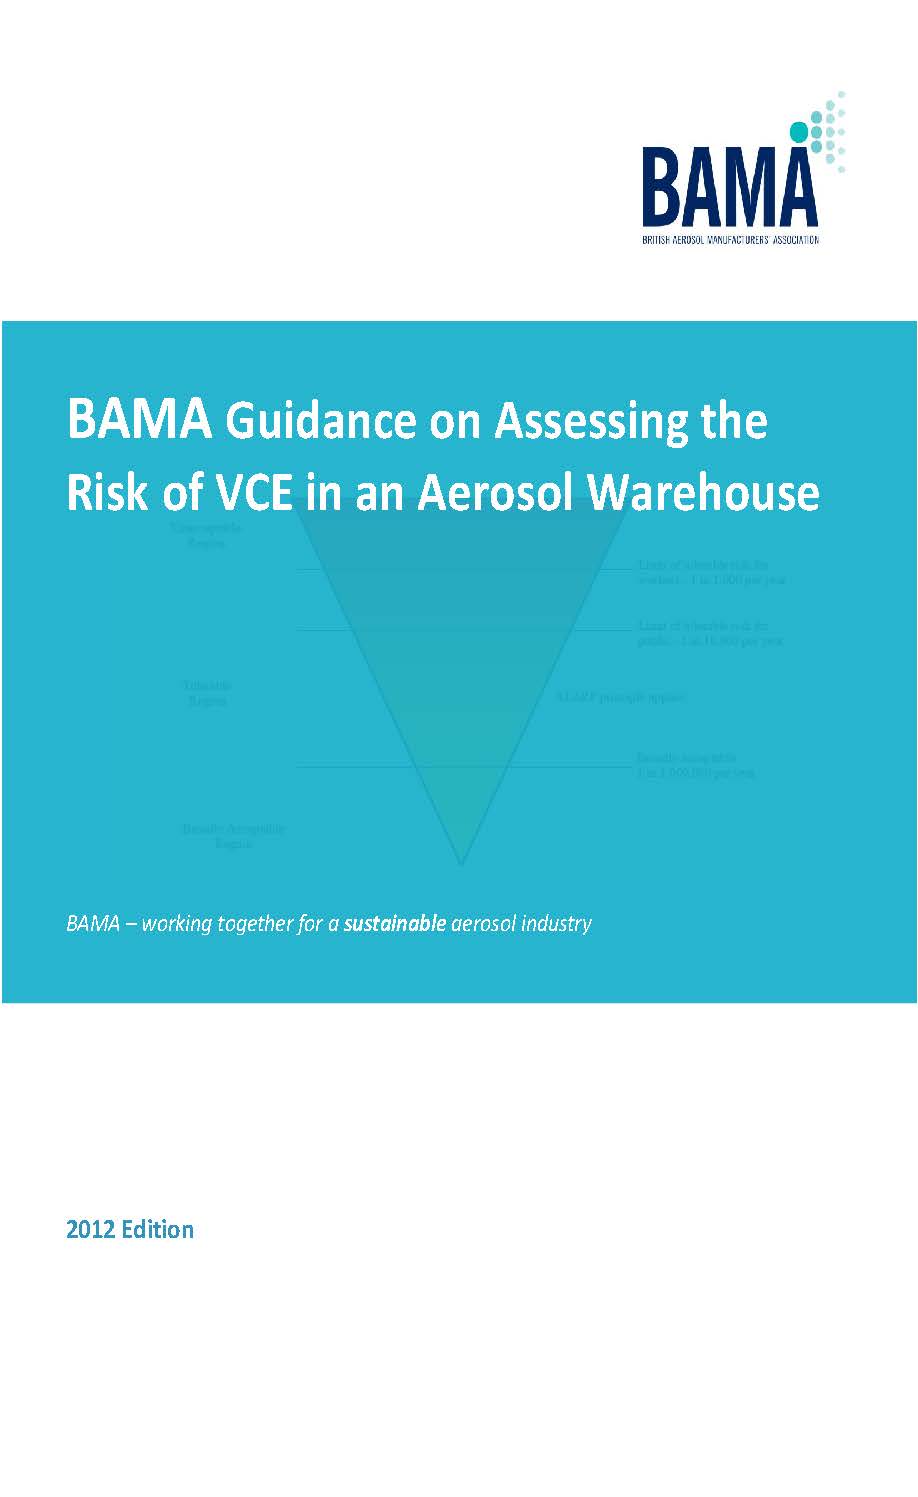 Practical Guidance on Assessing the Risk of A VCE in an Aerosol Warehouse